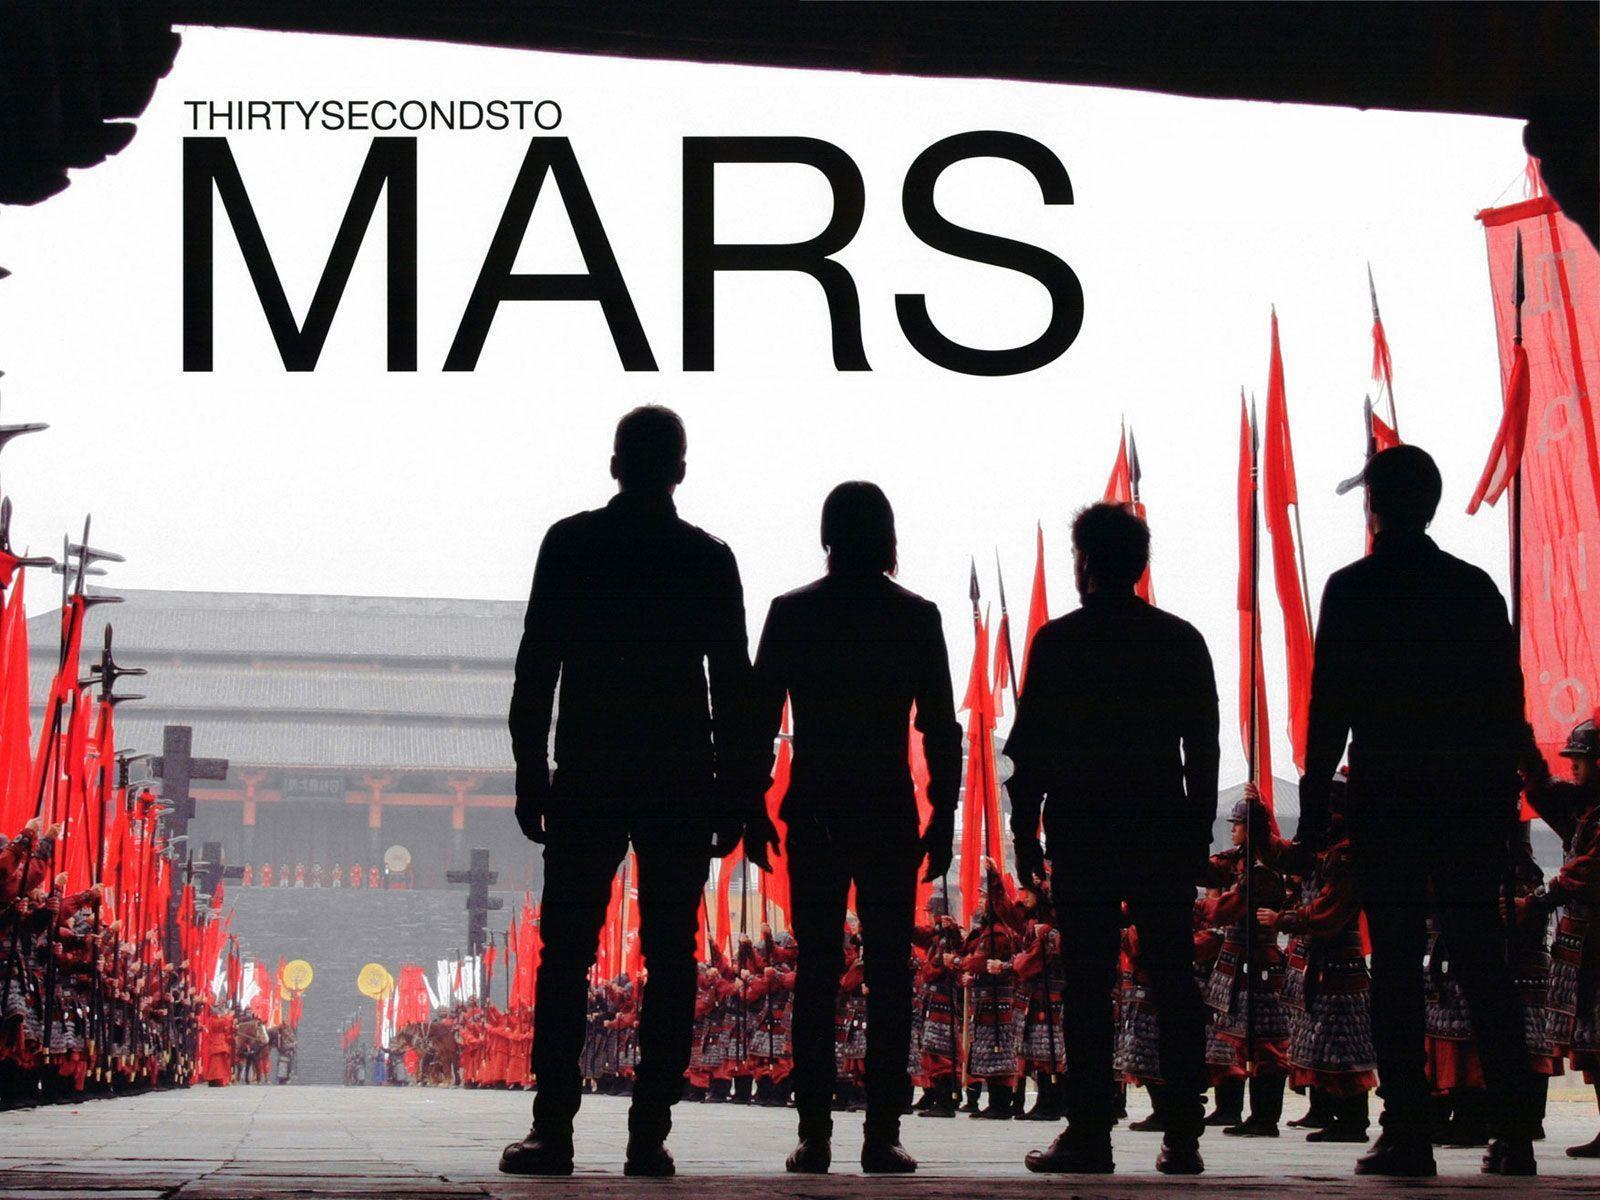 image about 30 seconds to mars